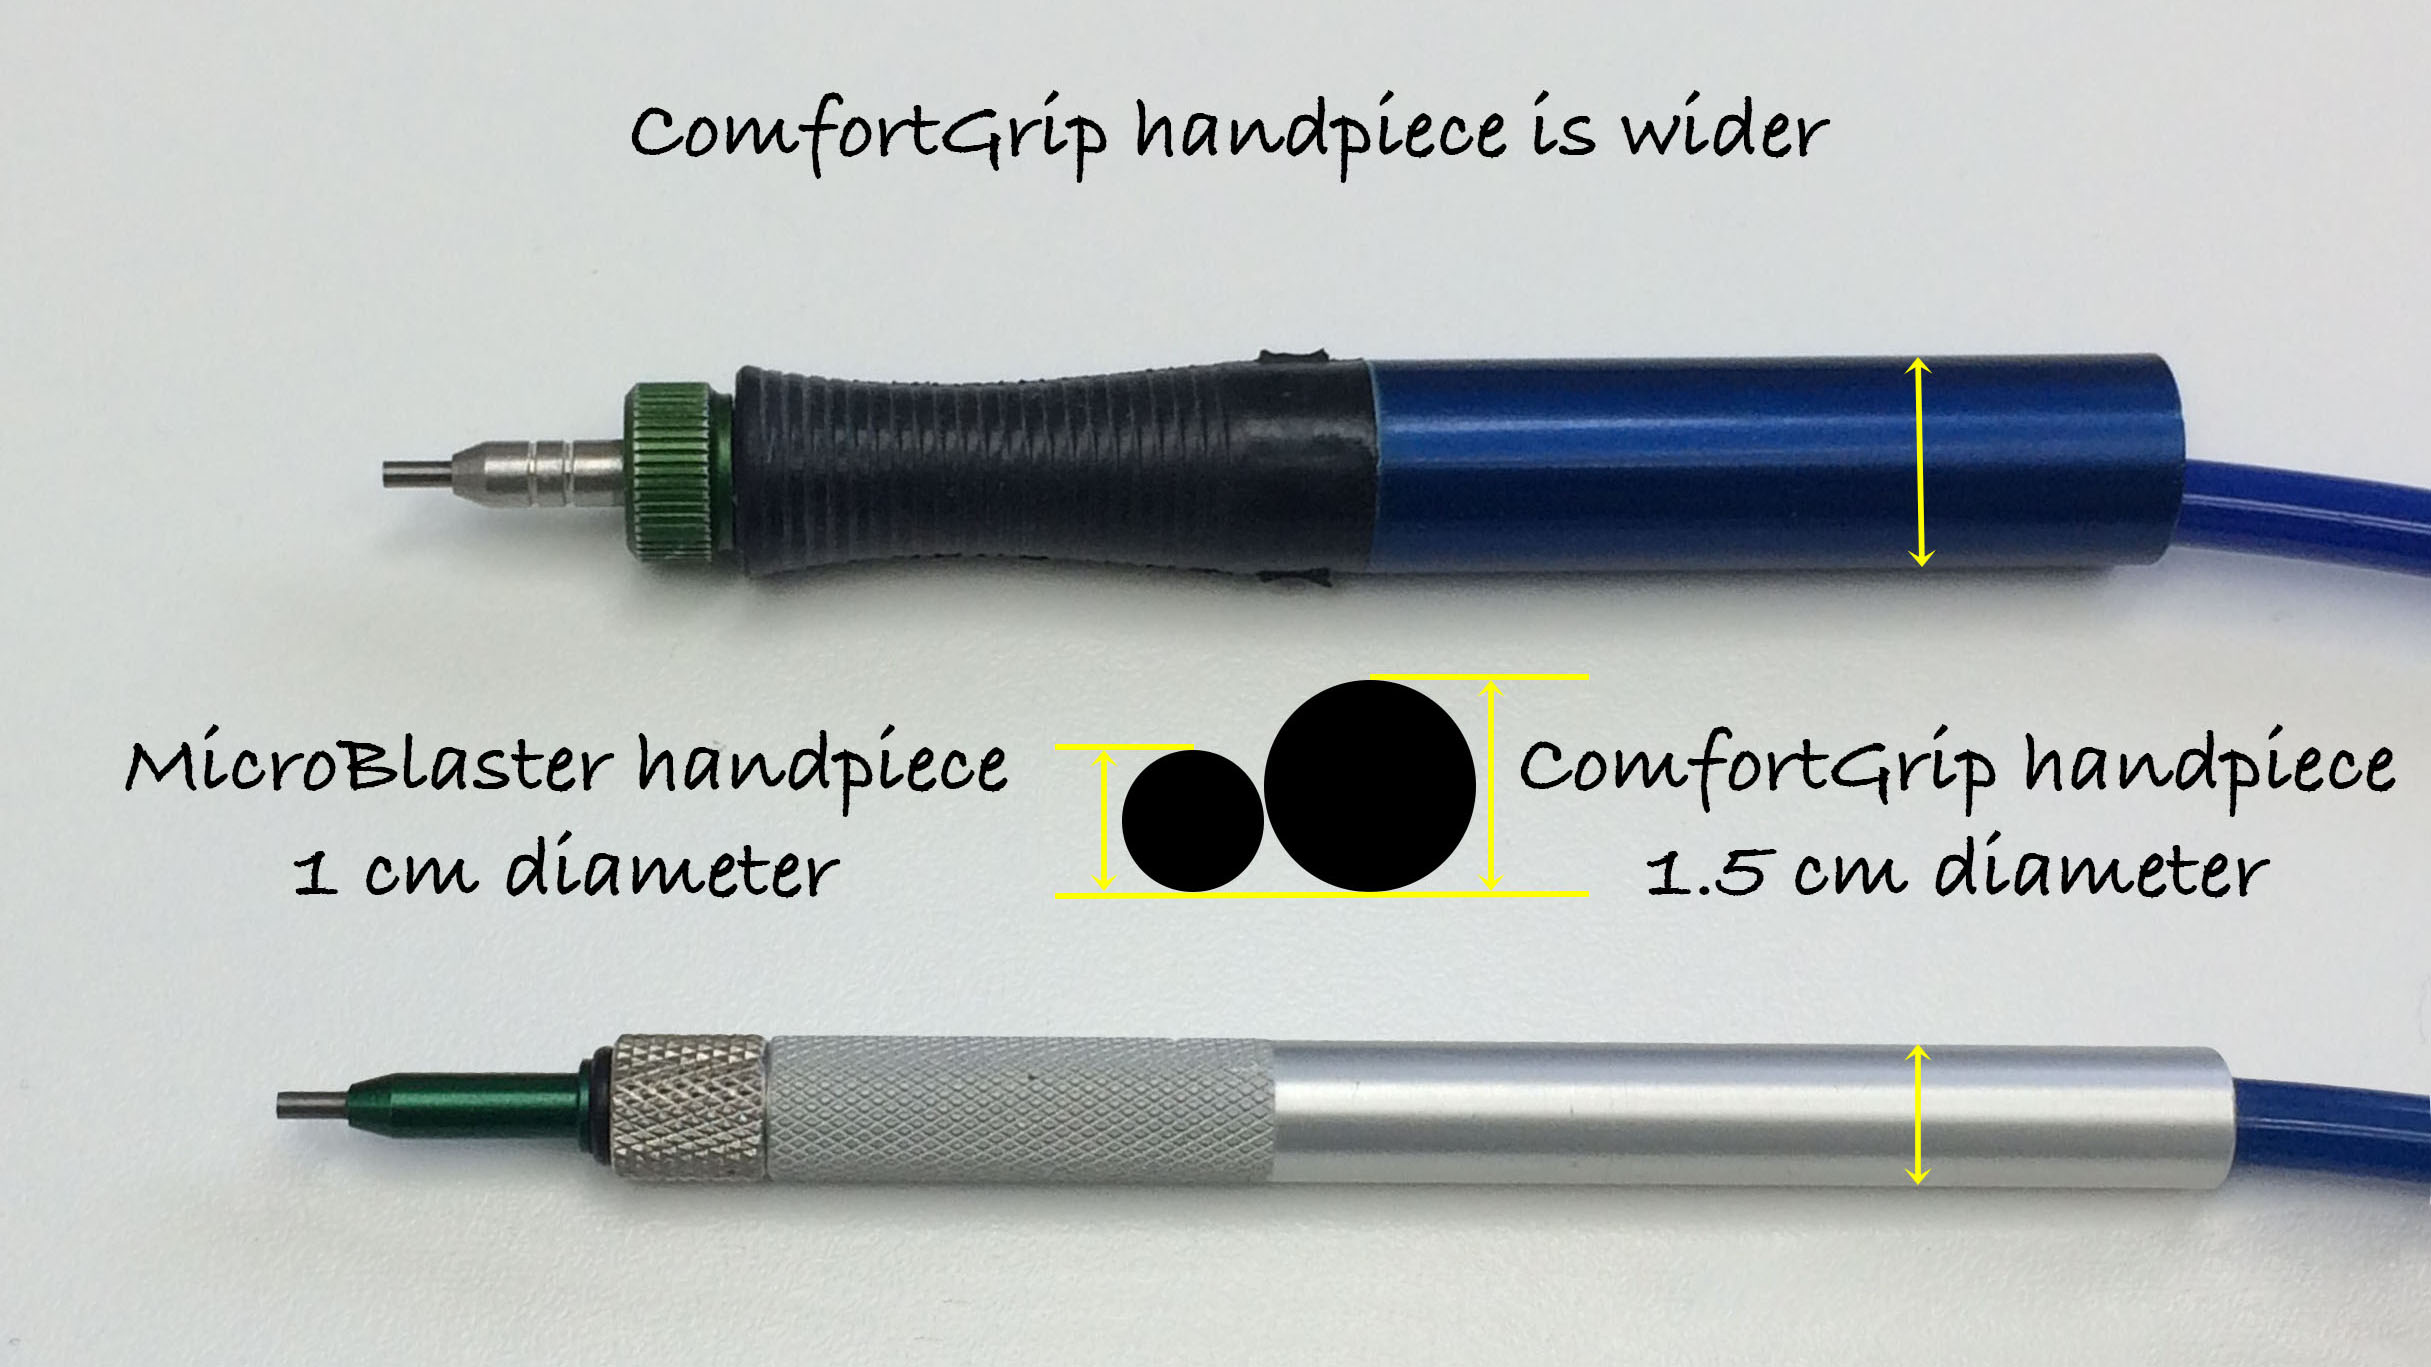 The ComfortGrip handpiece is wider than the MicroBlaster handpiece making it more pleasant to hold